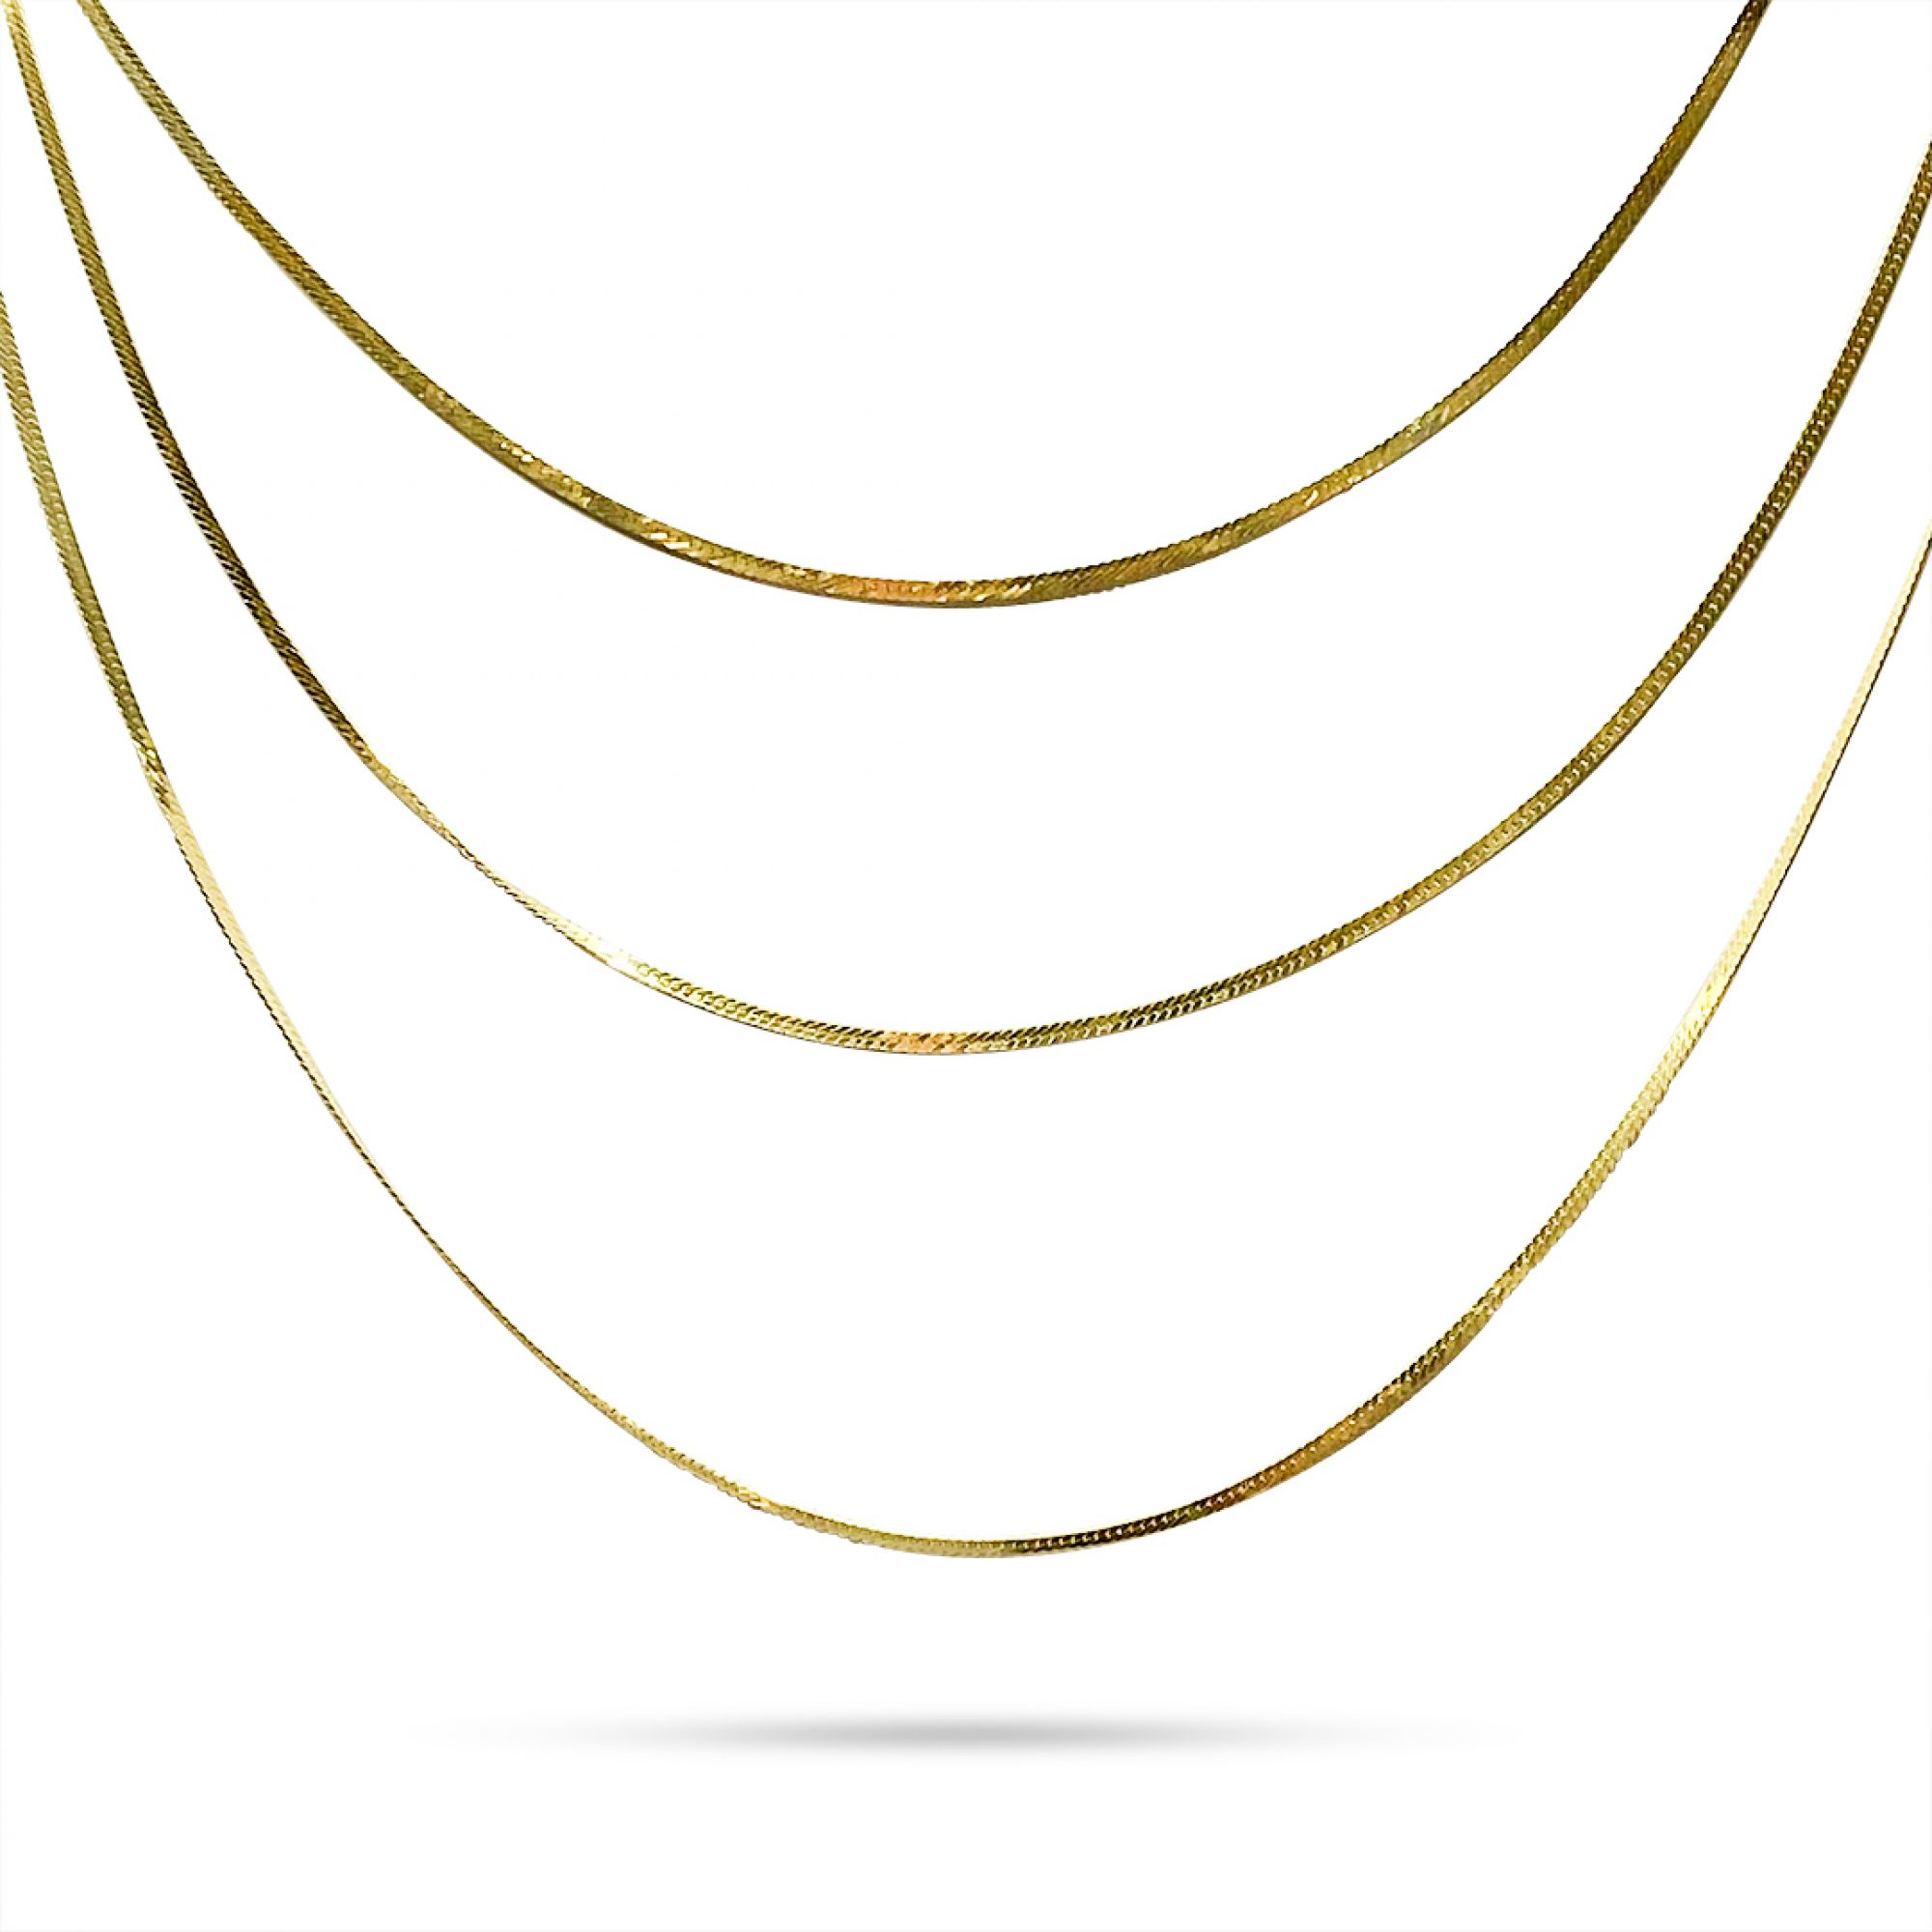 Triple gold plated snake chain necklace